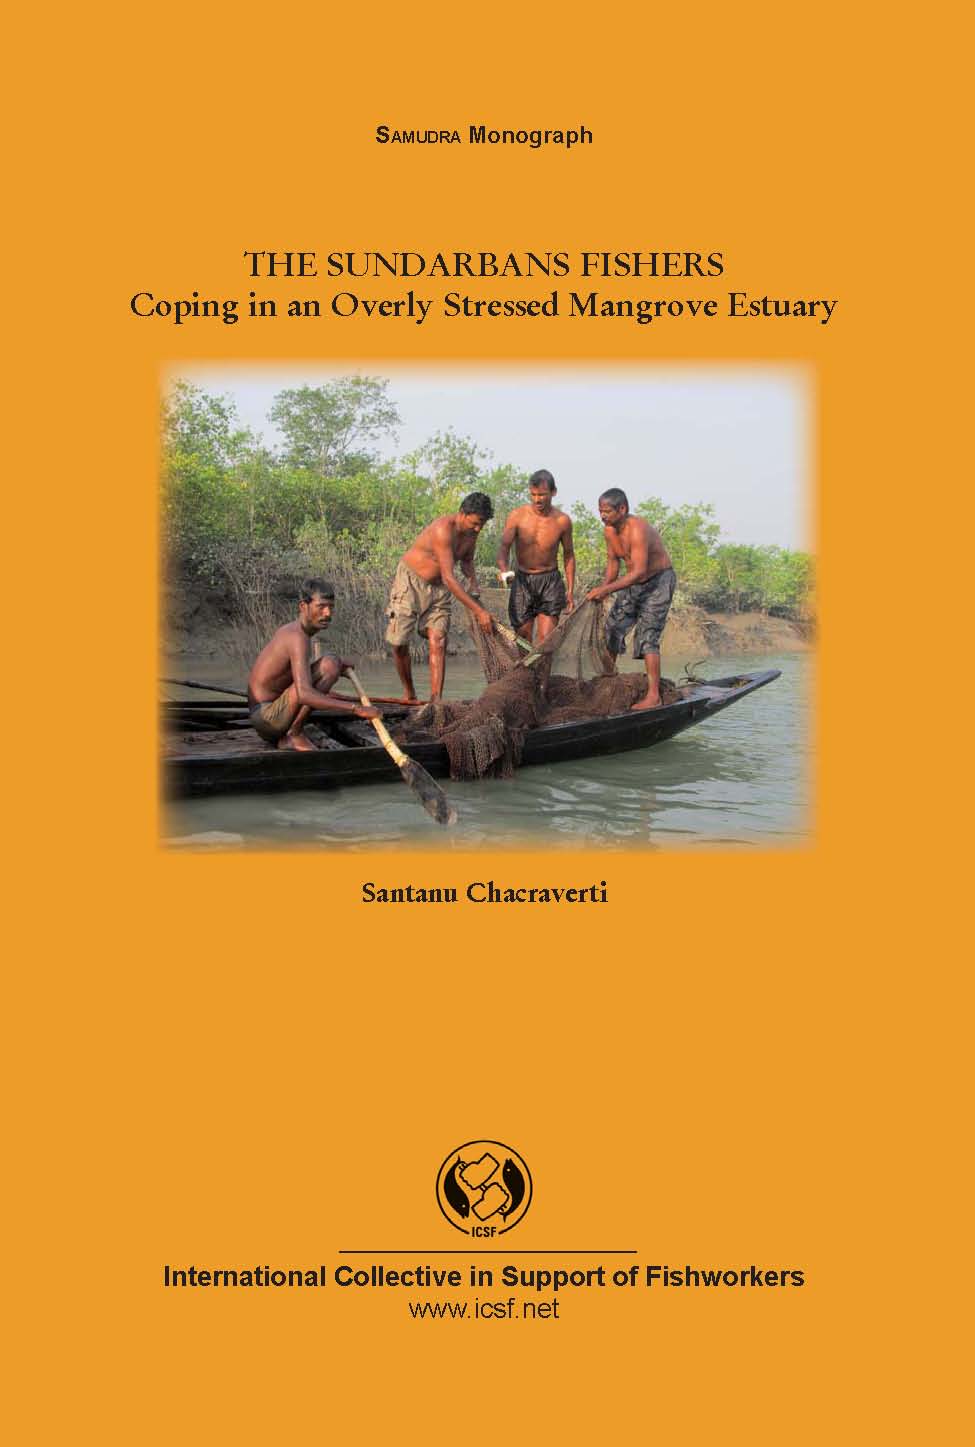 The Sundarbans Fishers: Coping in an Overly Stressed Mangrove Estuary